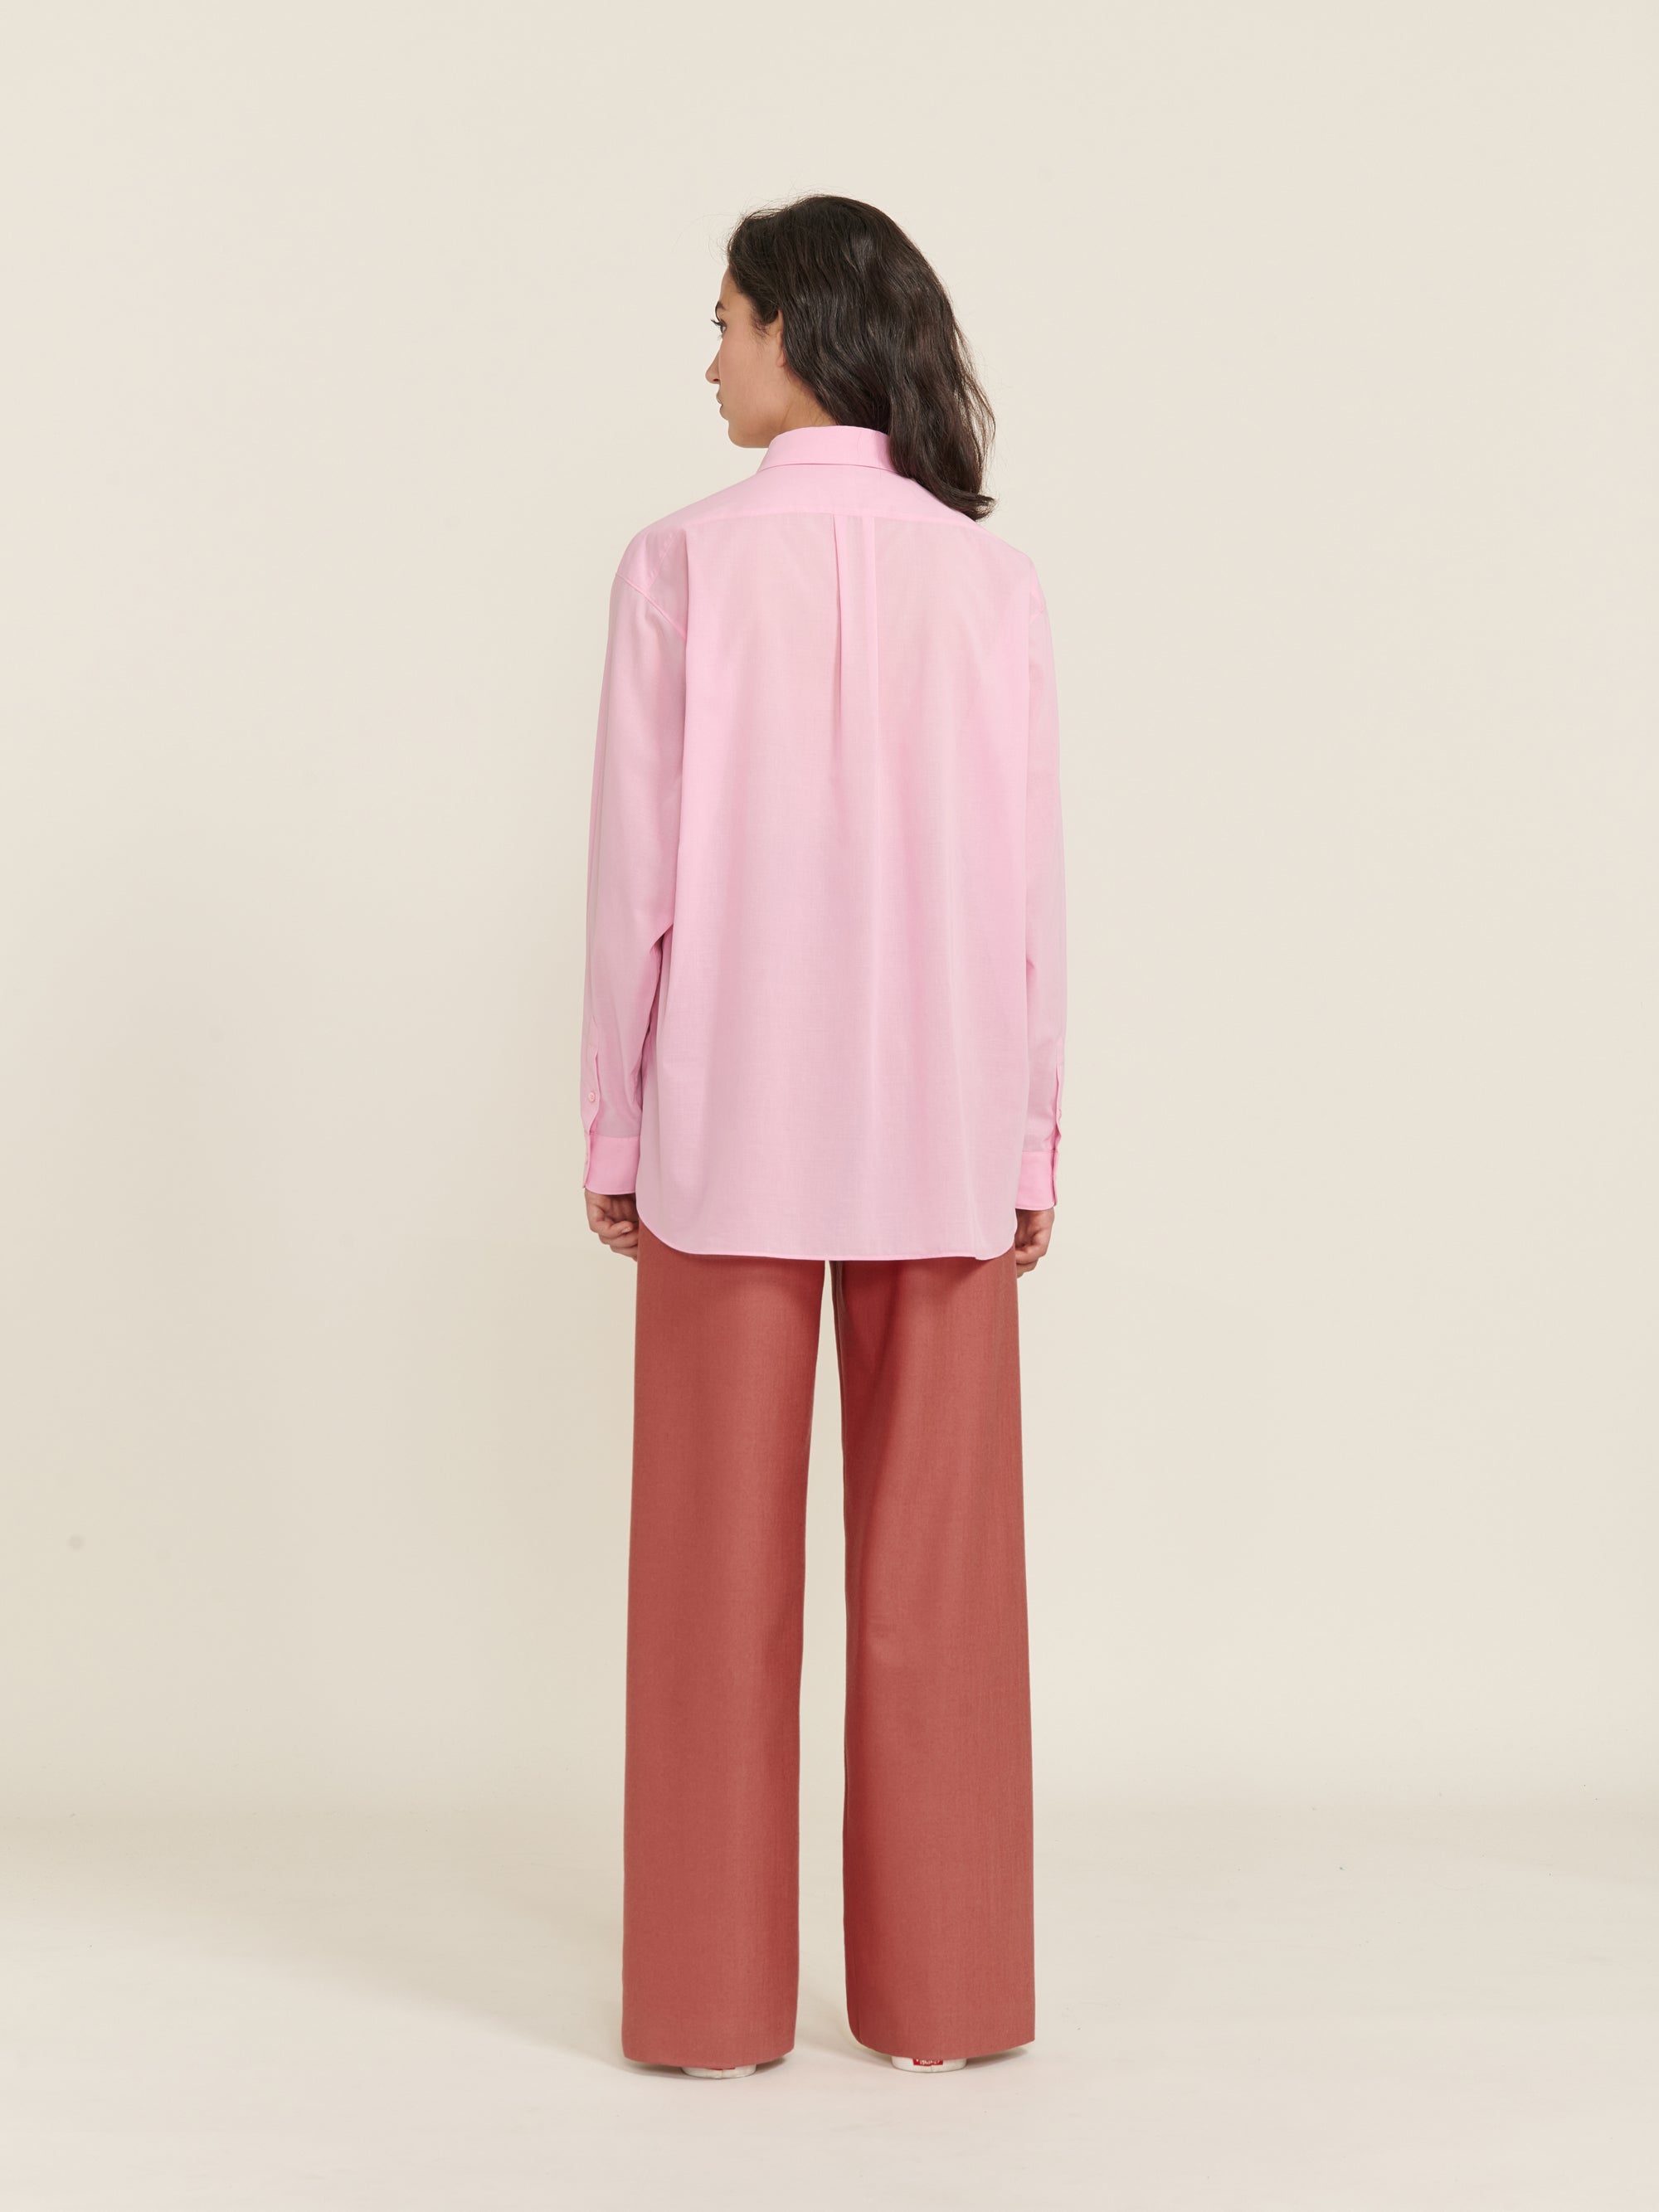 P168_FLANELLE_PINK_055